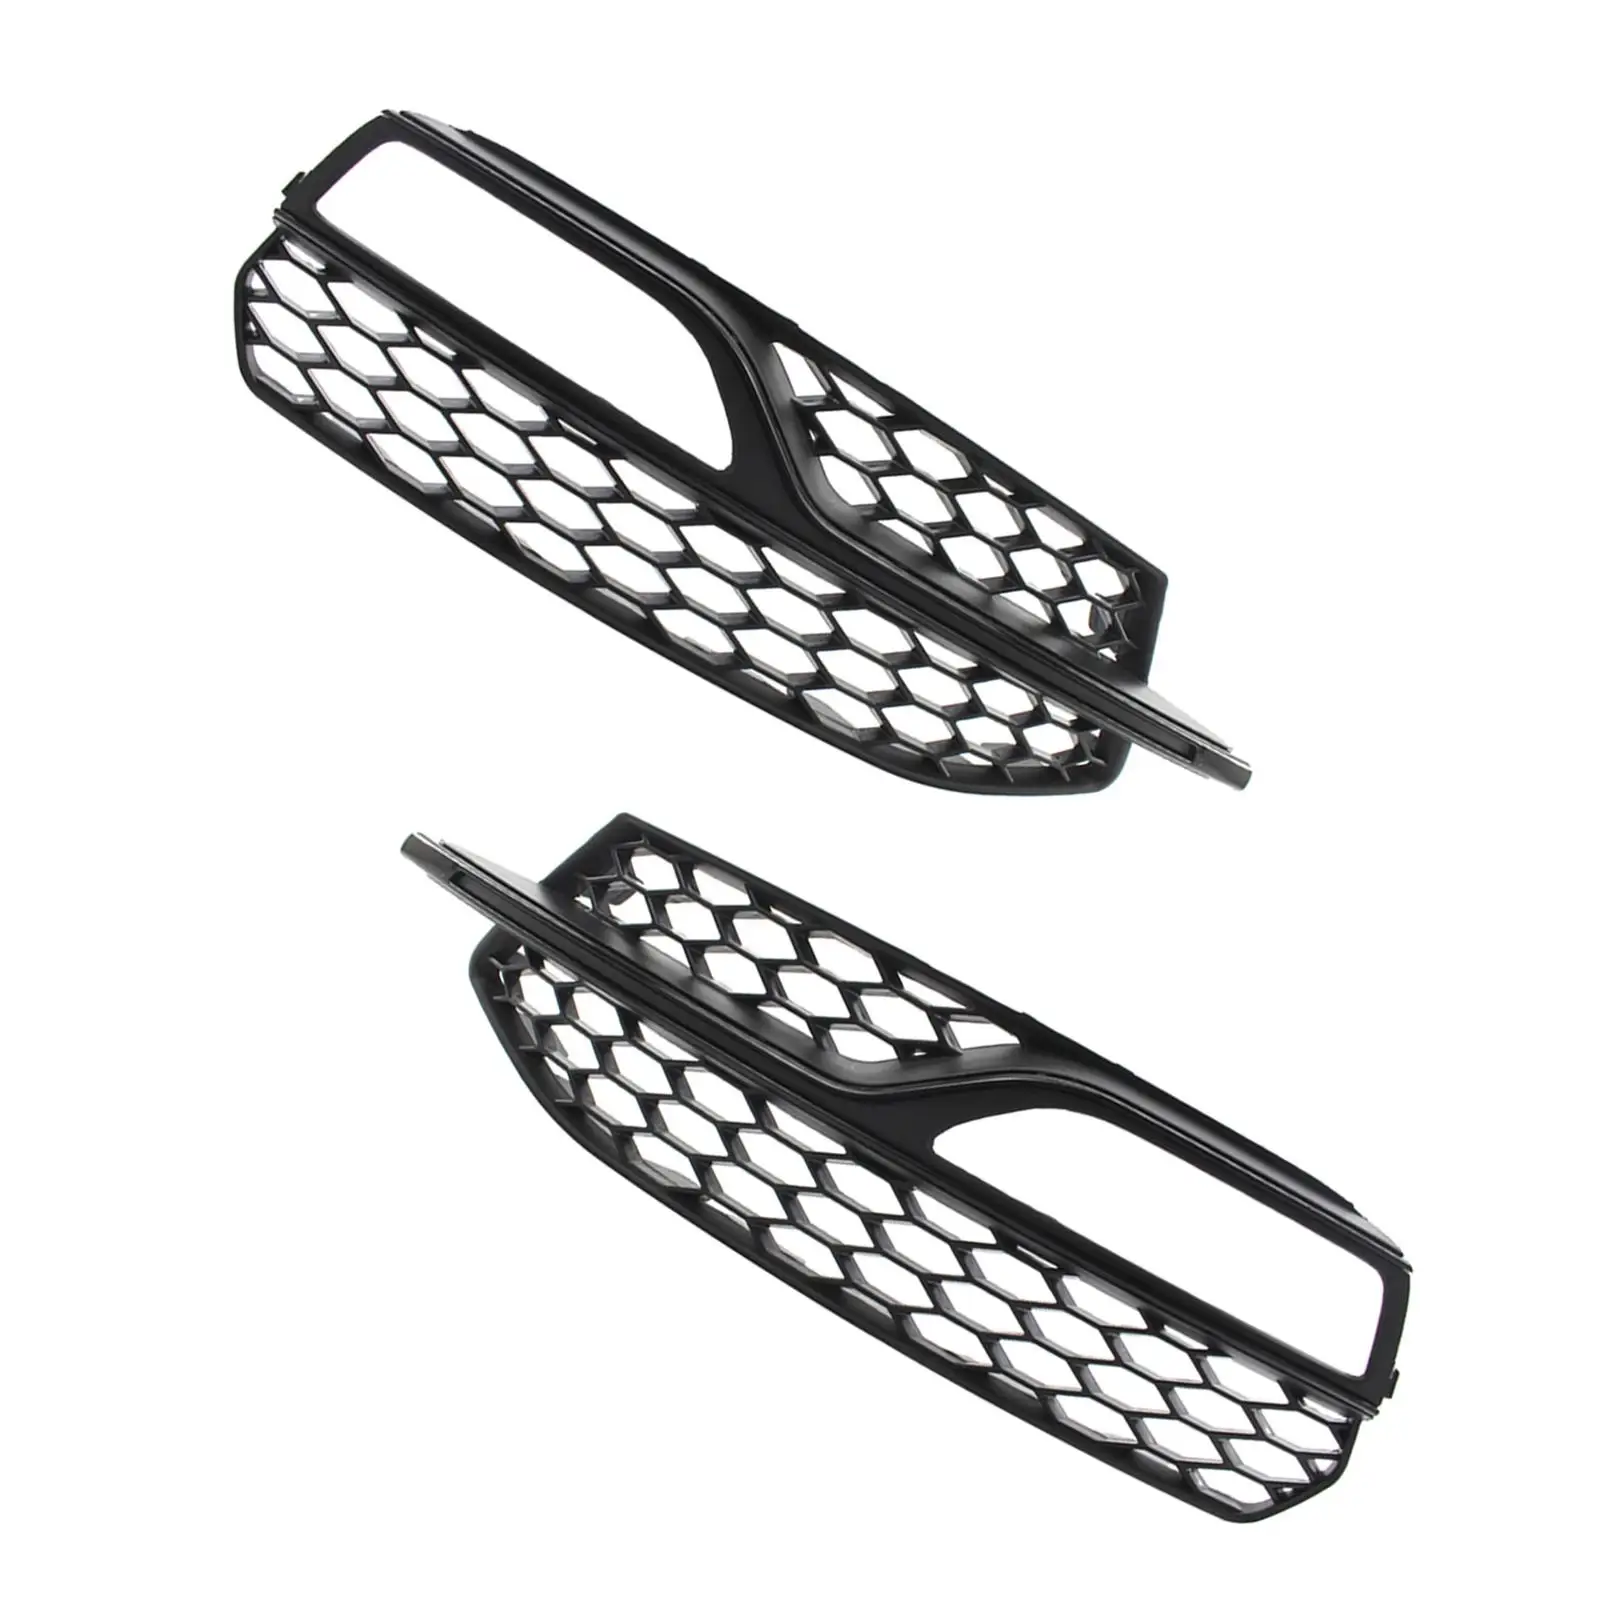 2-pack Front Bumper Fog Light Grilles for audi A3   14-16 Replacement